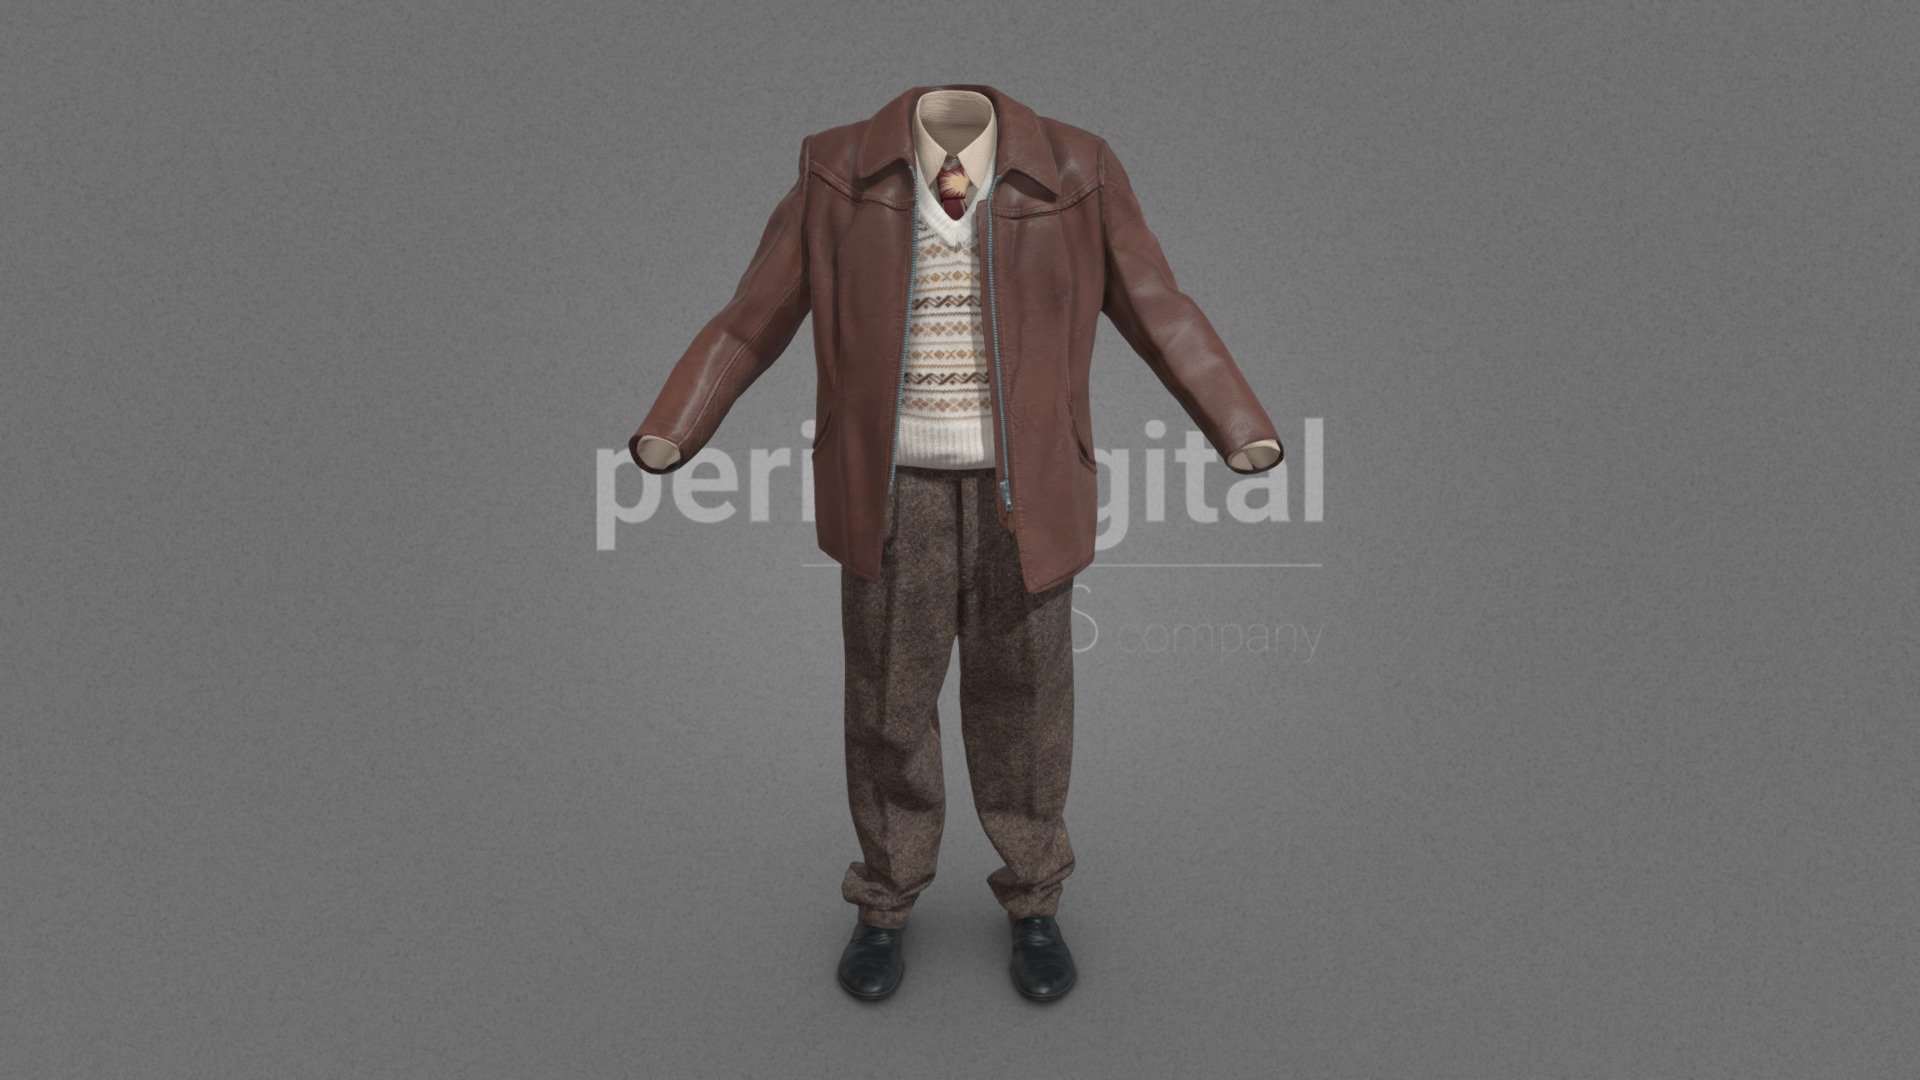 Shirt, tie, pullover, leather jacket, trousers, black shoes

Our “40s Fashion” collection consists of several sets, which you can use in your audiovisual creations, extracted and modeled from our catalog of photogrammetry pieces.

They are optimized for use in 3D scenes of medium/high polygonalization and optimized for rendering.

We do not include characters, but they are positioned for you to include and adjust your own character.

They have a model LOW (_LODRIG) inside the Blender file (included in the AdditionalFiles), which you can use for vertex weighting or cloth simulation and thus, make the transfer of vertices or property masks from the LOW to the HIGH** model.

**We have included the texture maps in high resolution, so you can make extreme point of view with your 3D cameras, as well as the Blender file so you can edit any aspect of the set.

Enjoy it.

Web: https://peris.digital/ - 40s Fashion Series - Man 01 - Buy Royalty Free 3D model by Peris Digital (@perisdigital) 3d model